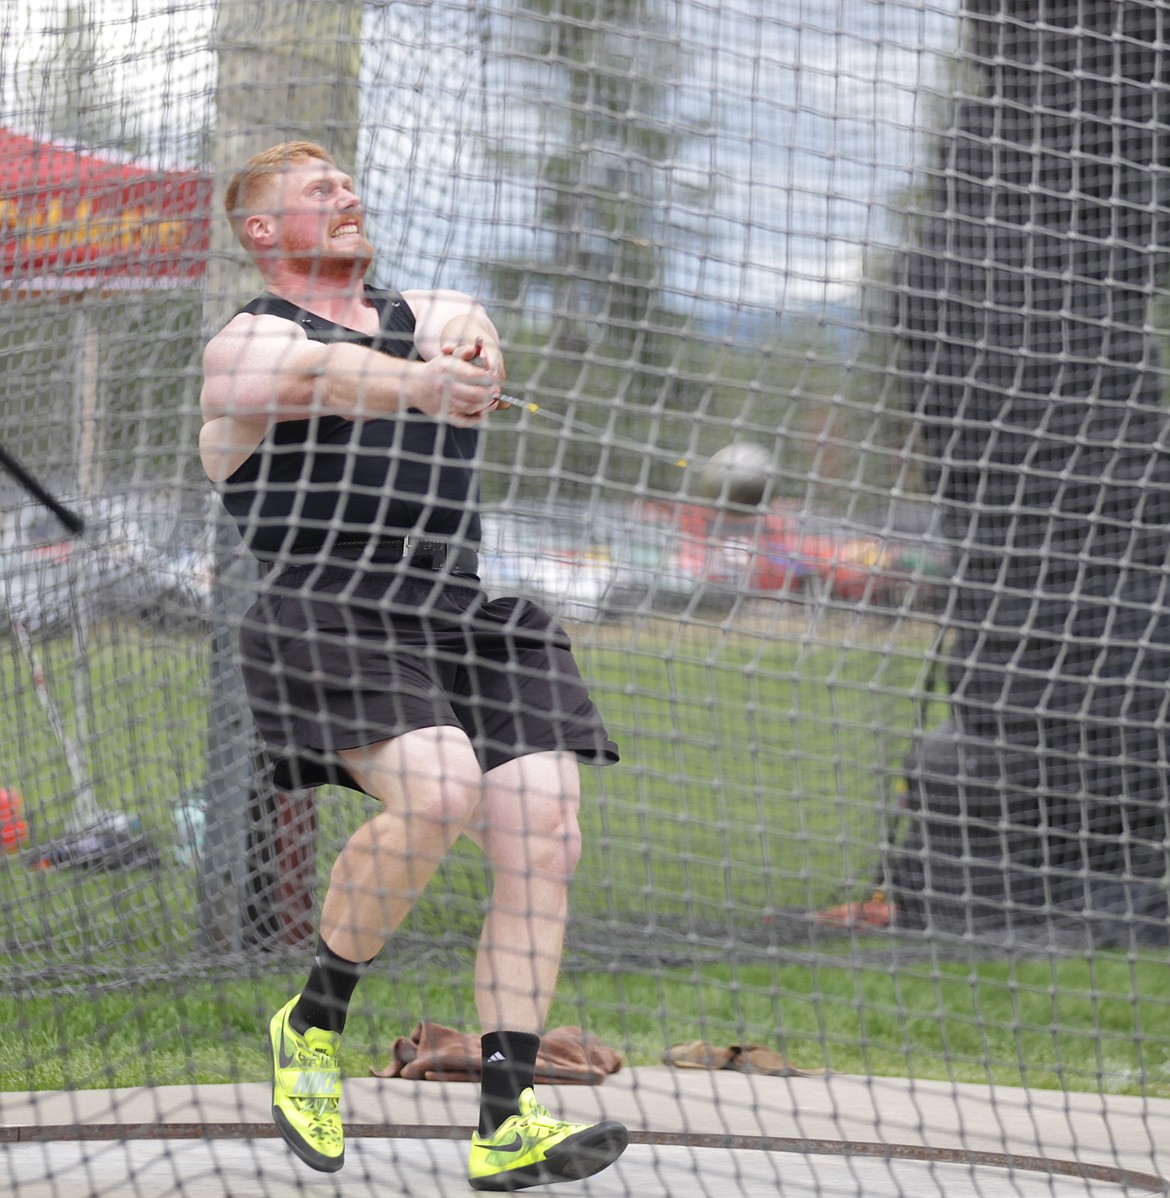 JASON ELLIOTT/Press
Brock Eager, who trains at the Iron Wood Throws Center, winds up for an attempt during the men's hammer throw in the seventh Iron Wood Throws Classic on Saturday in Rathdrum. Eager won the event with personal best 251 feet, 3 inches.